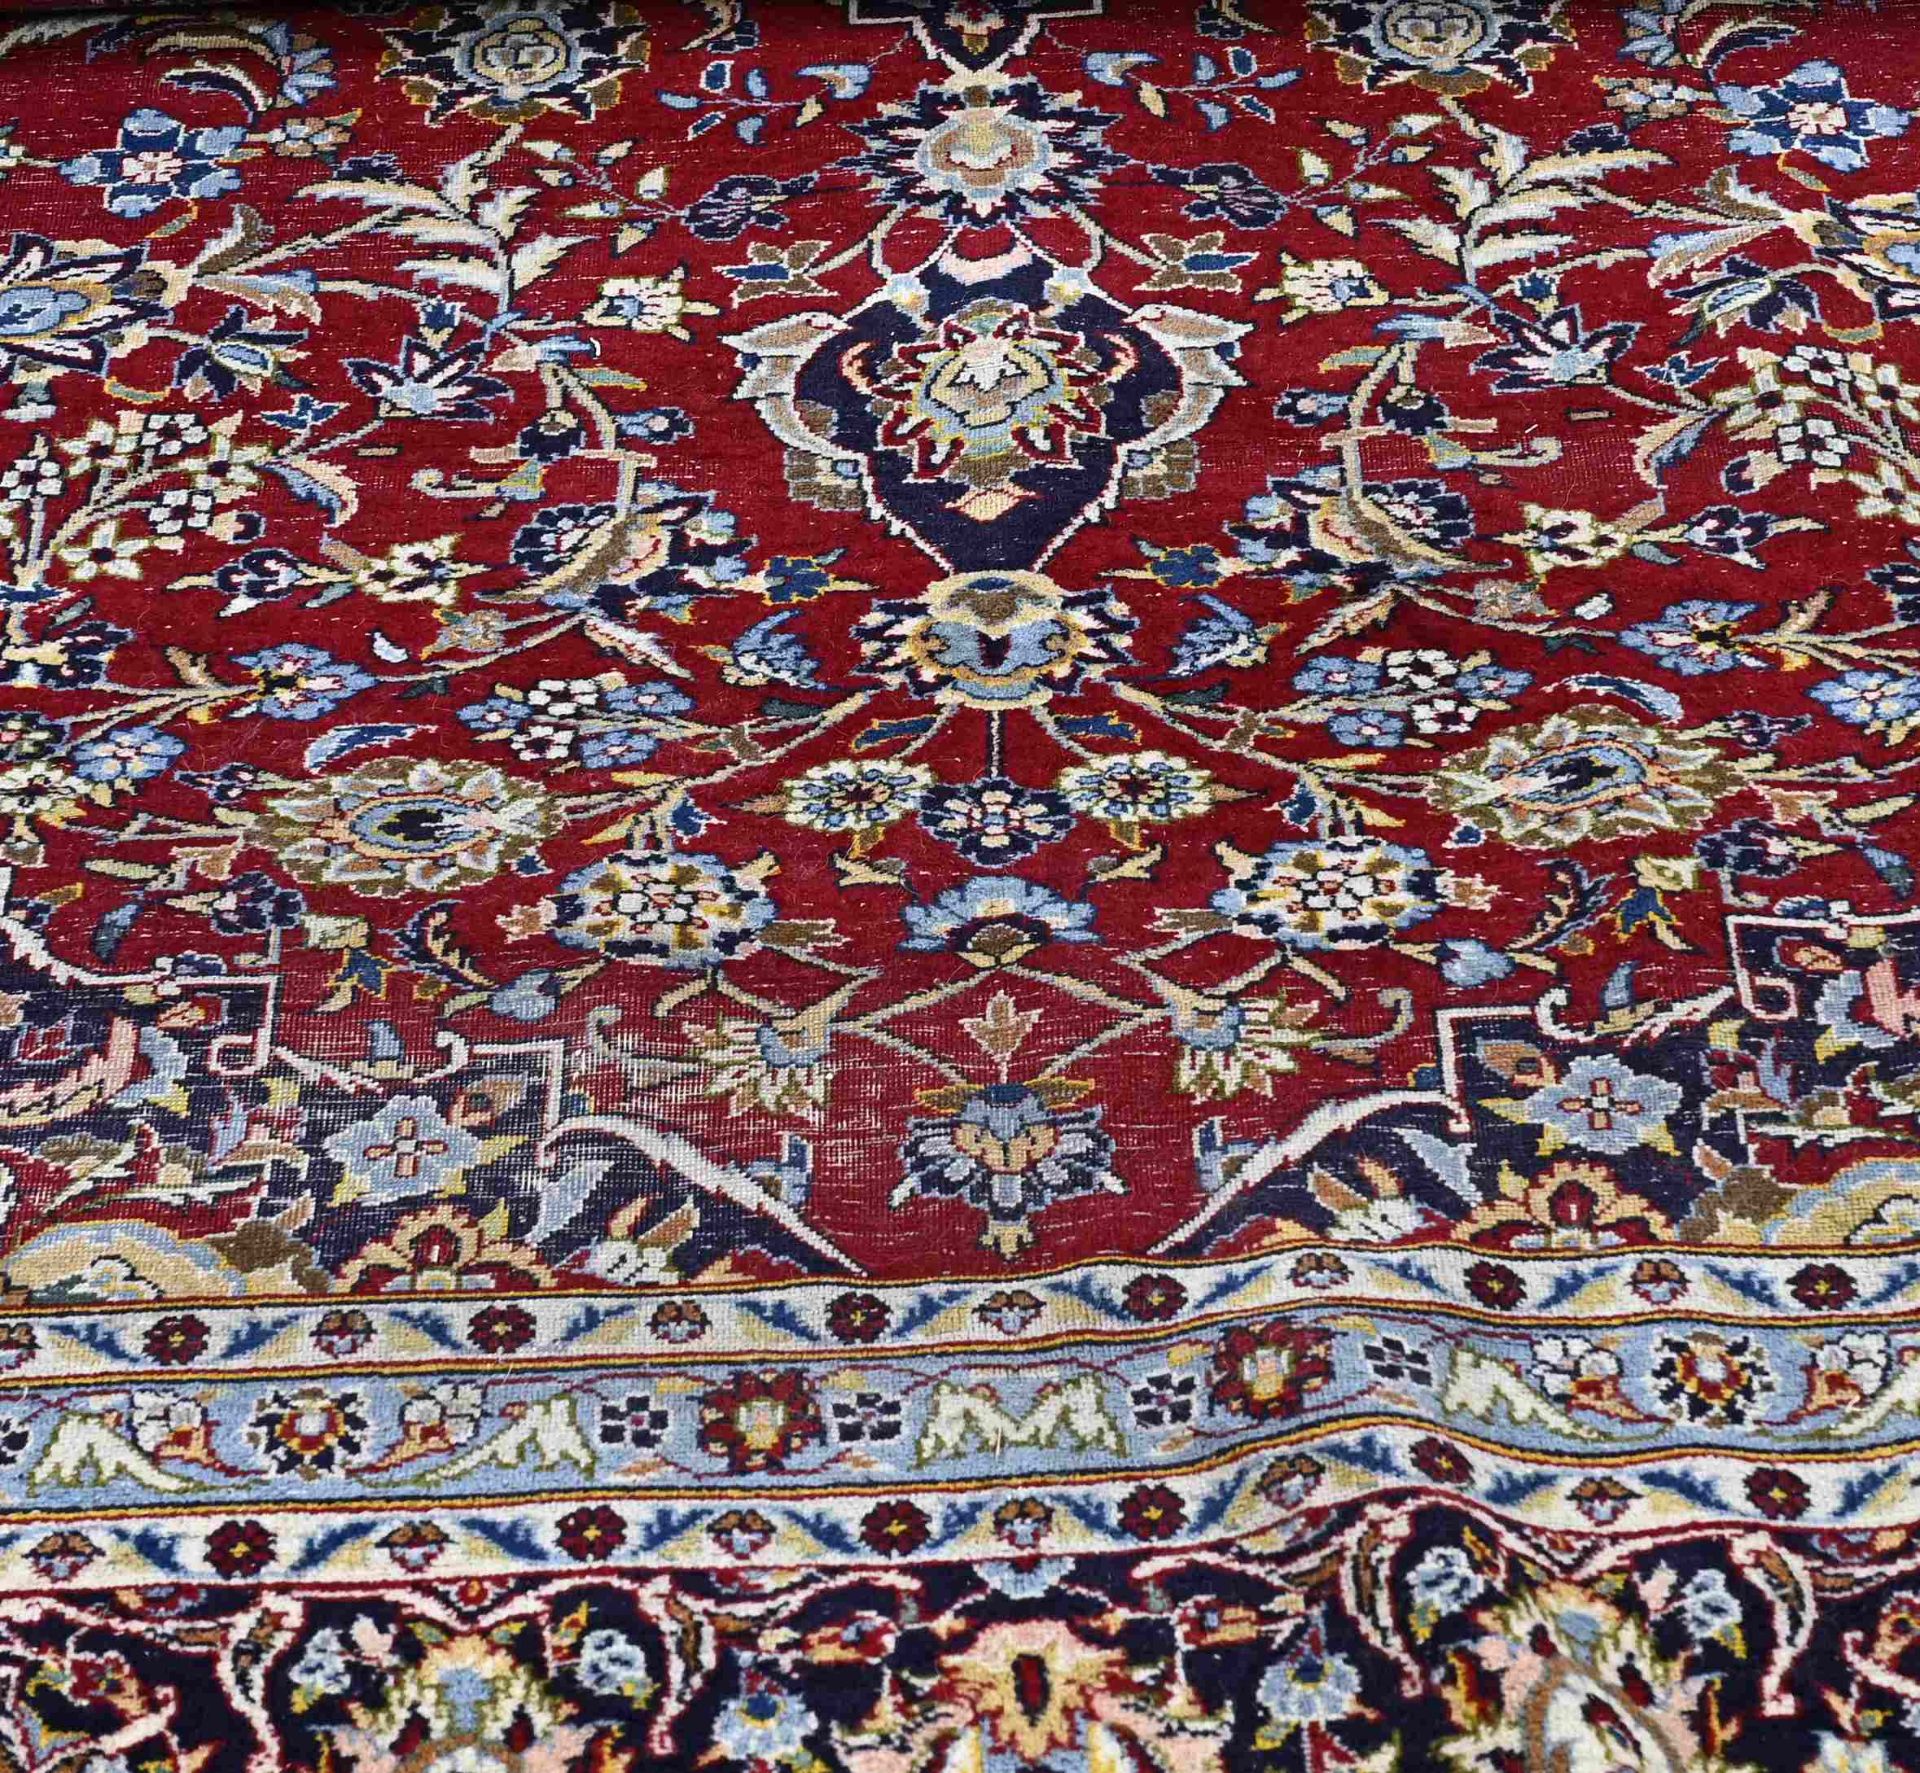 Large Persian rug, 300 x 400 cm. - Image 2 of 3